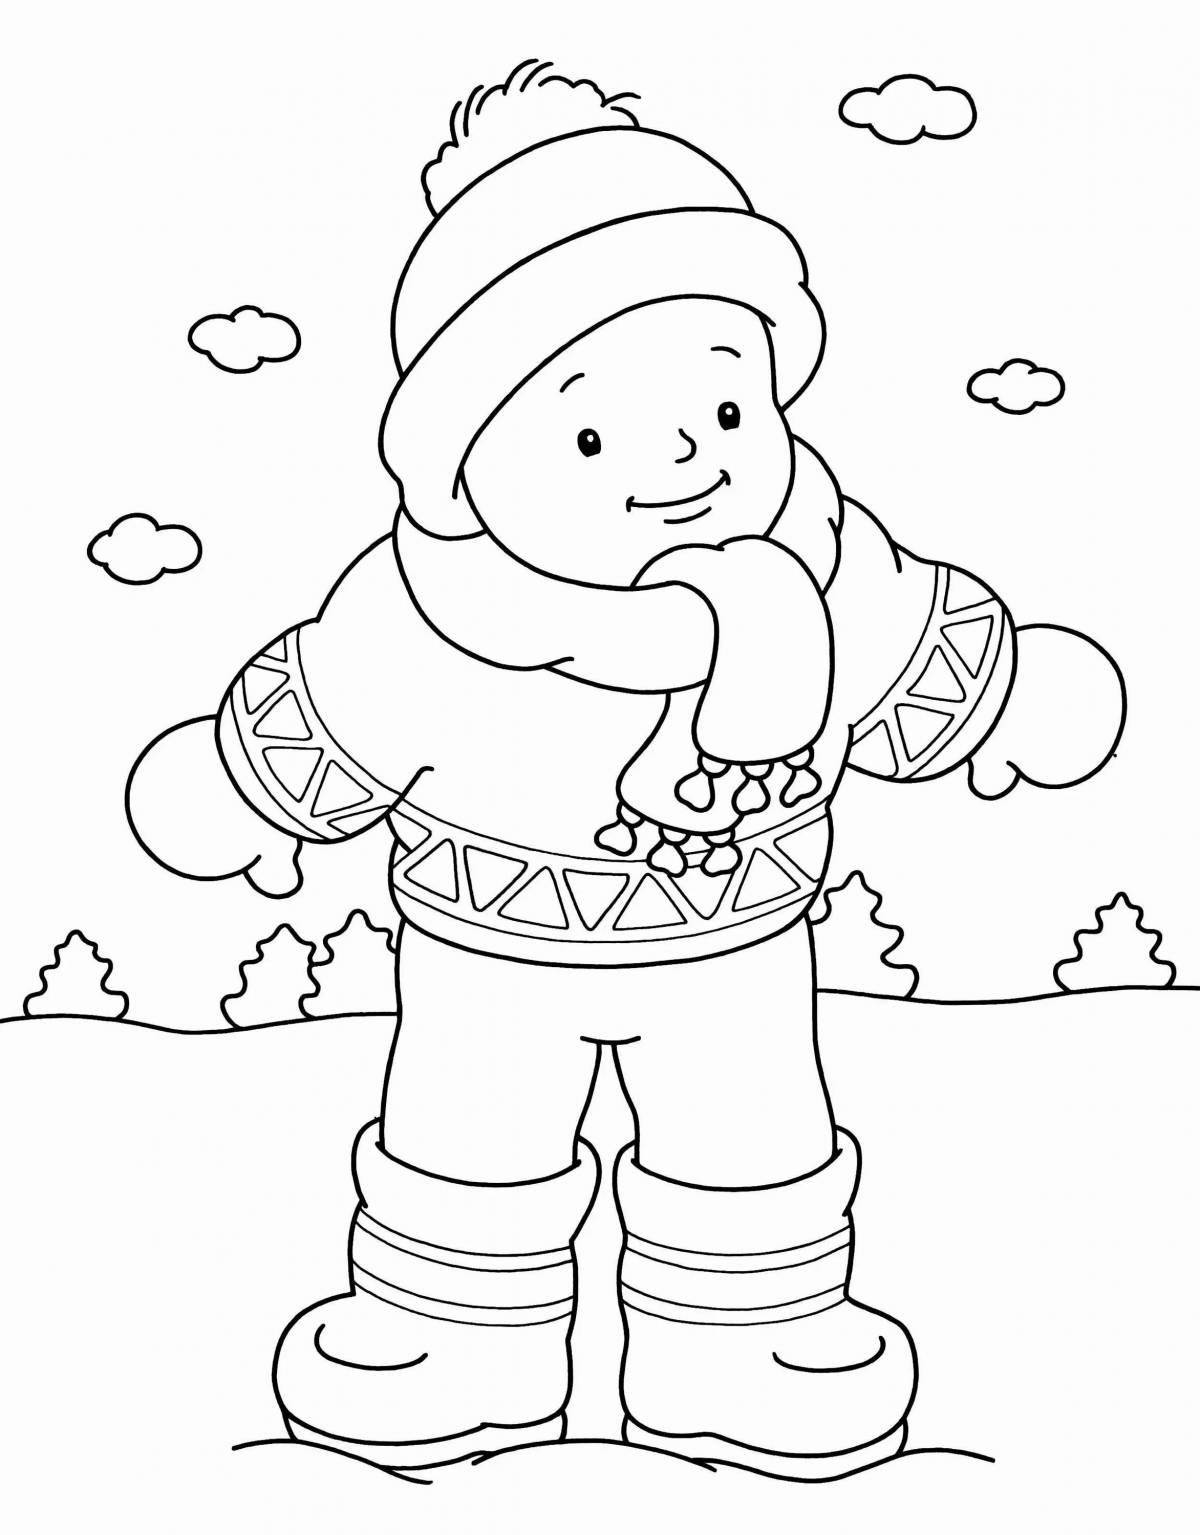 Creative winter clothes coloring pages for kids